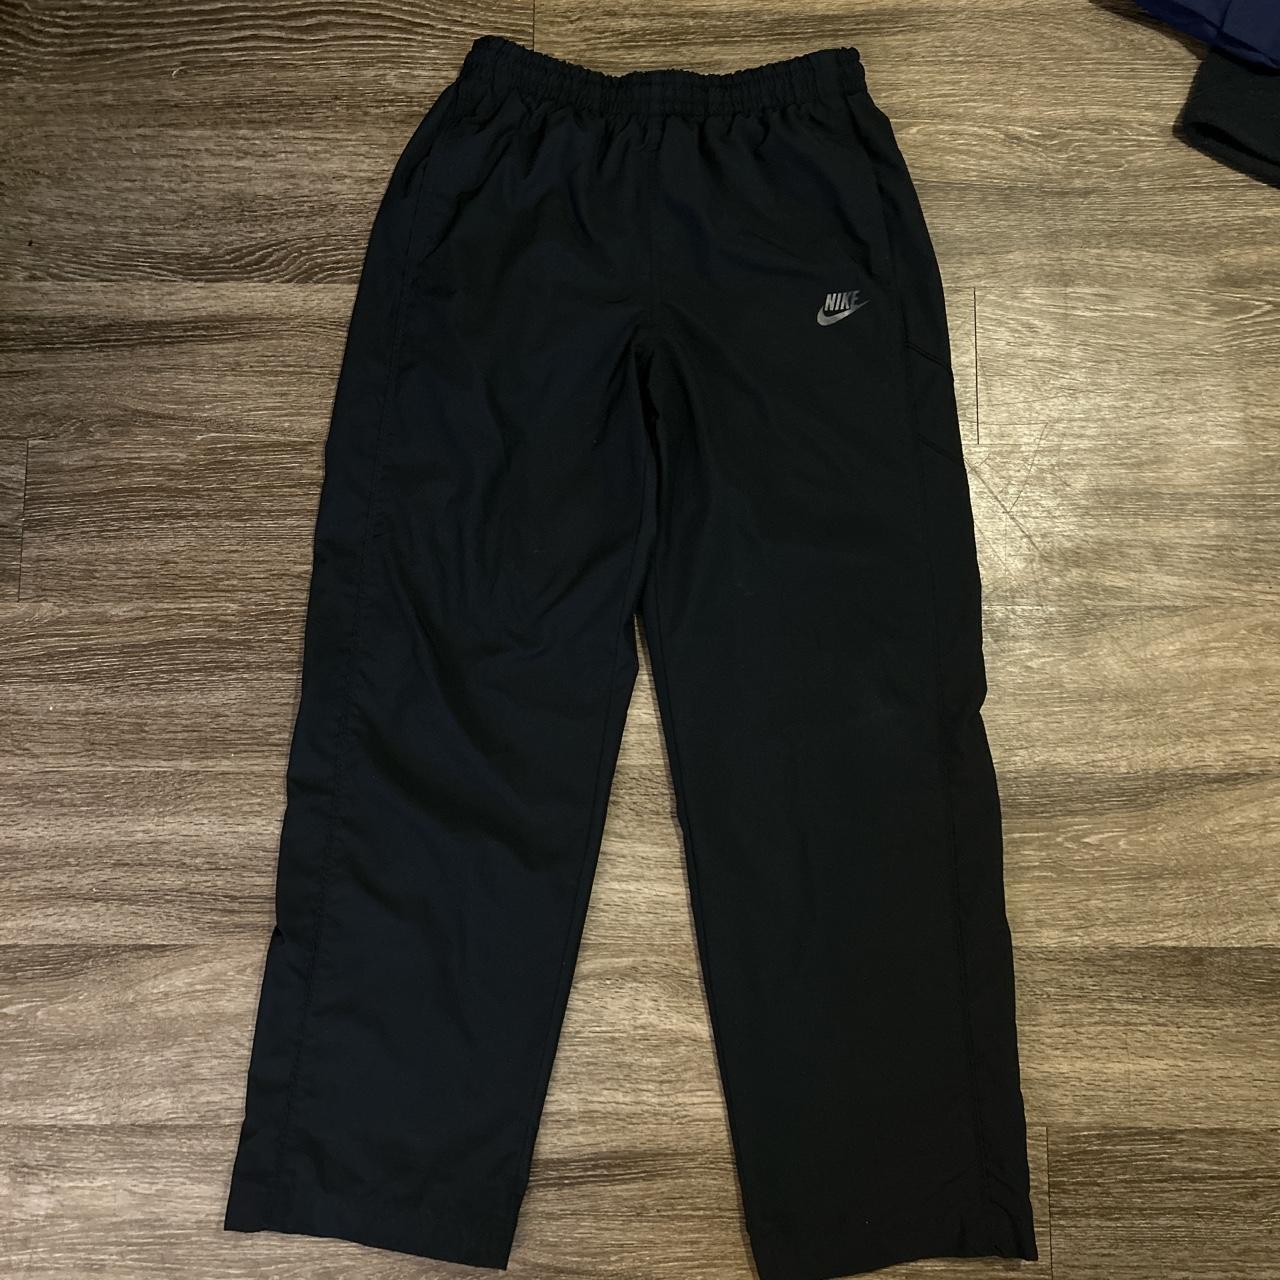 Nike Men's Black and Grey Joggers-tracksuits (2)